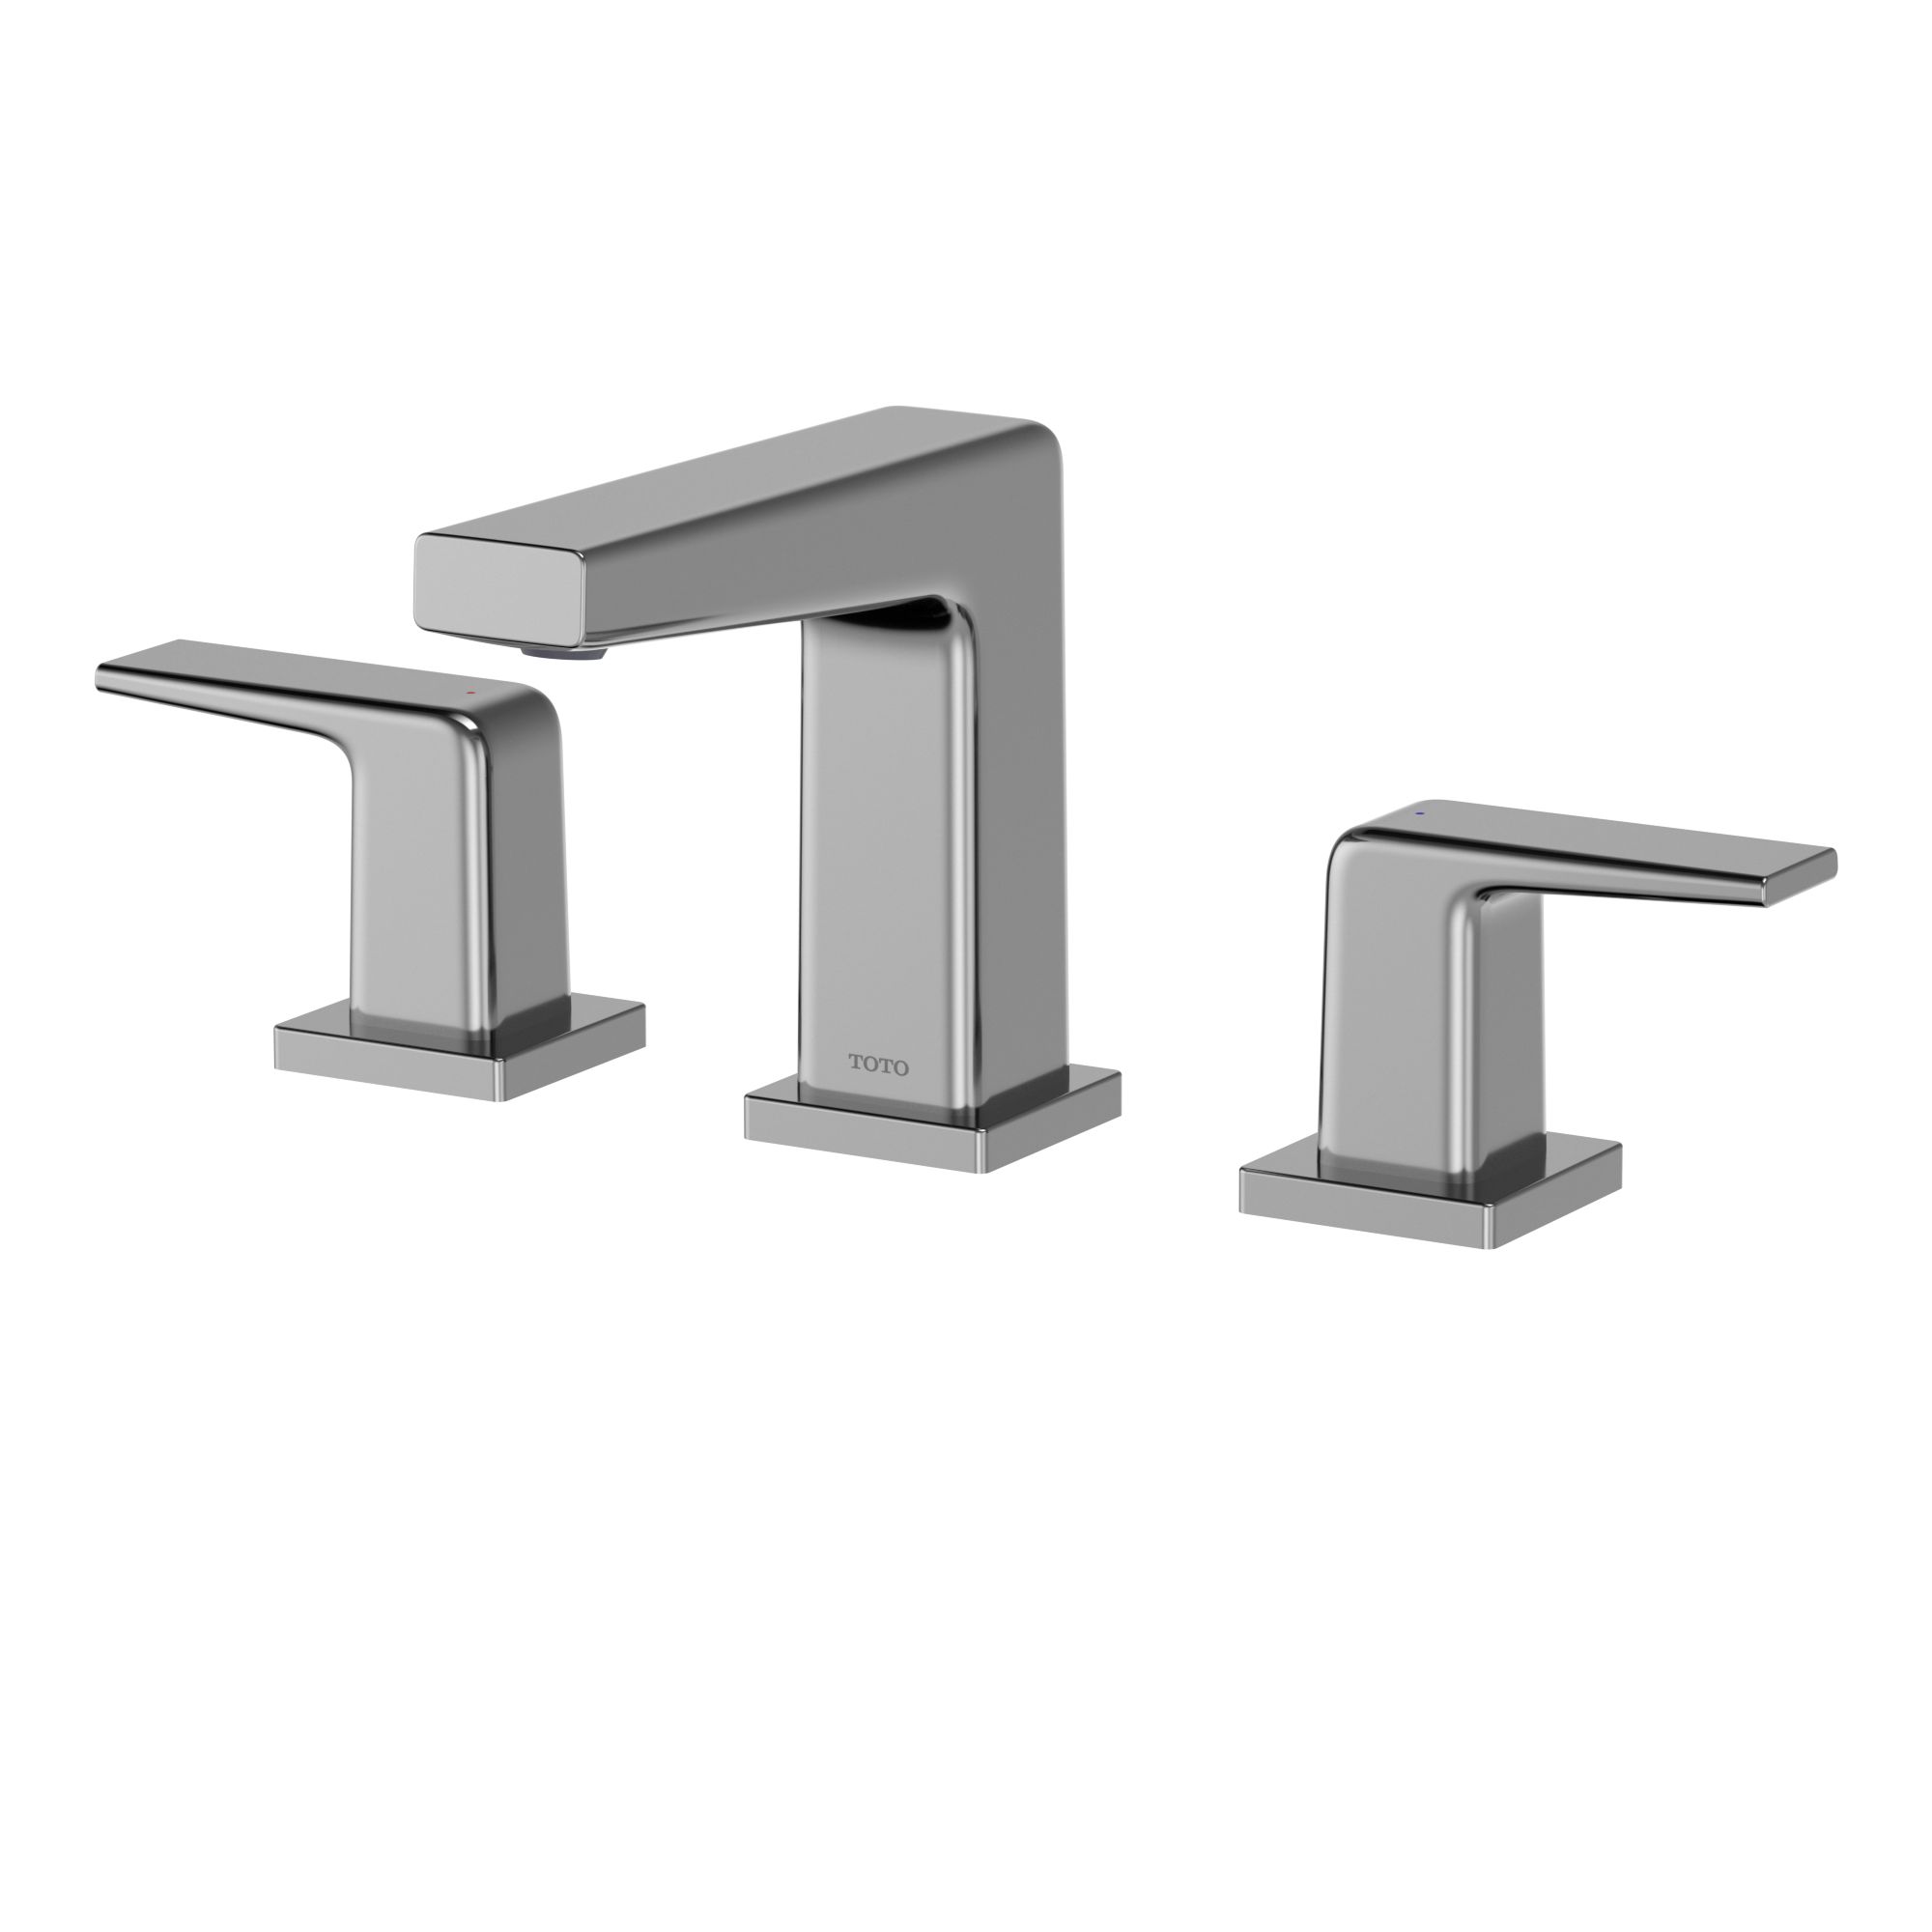 GB Widespread Faucet - 1.2 GPM